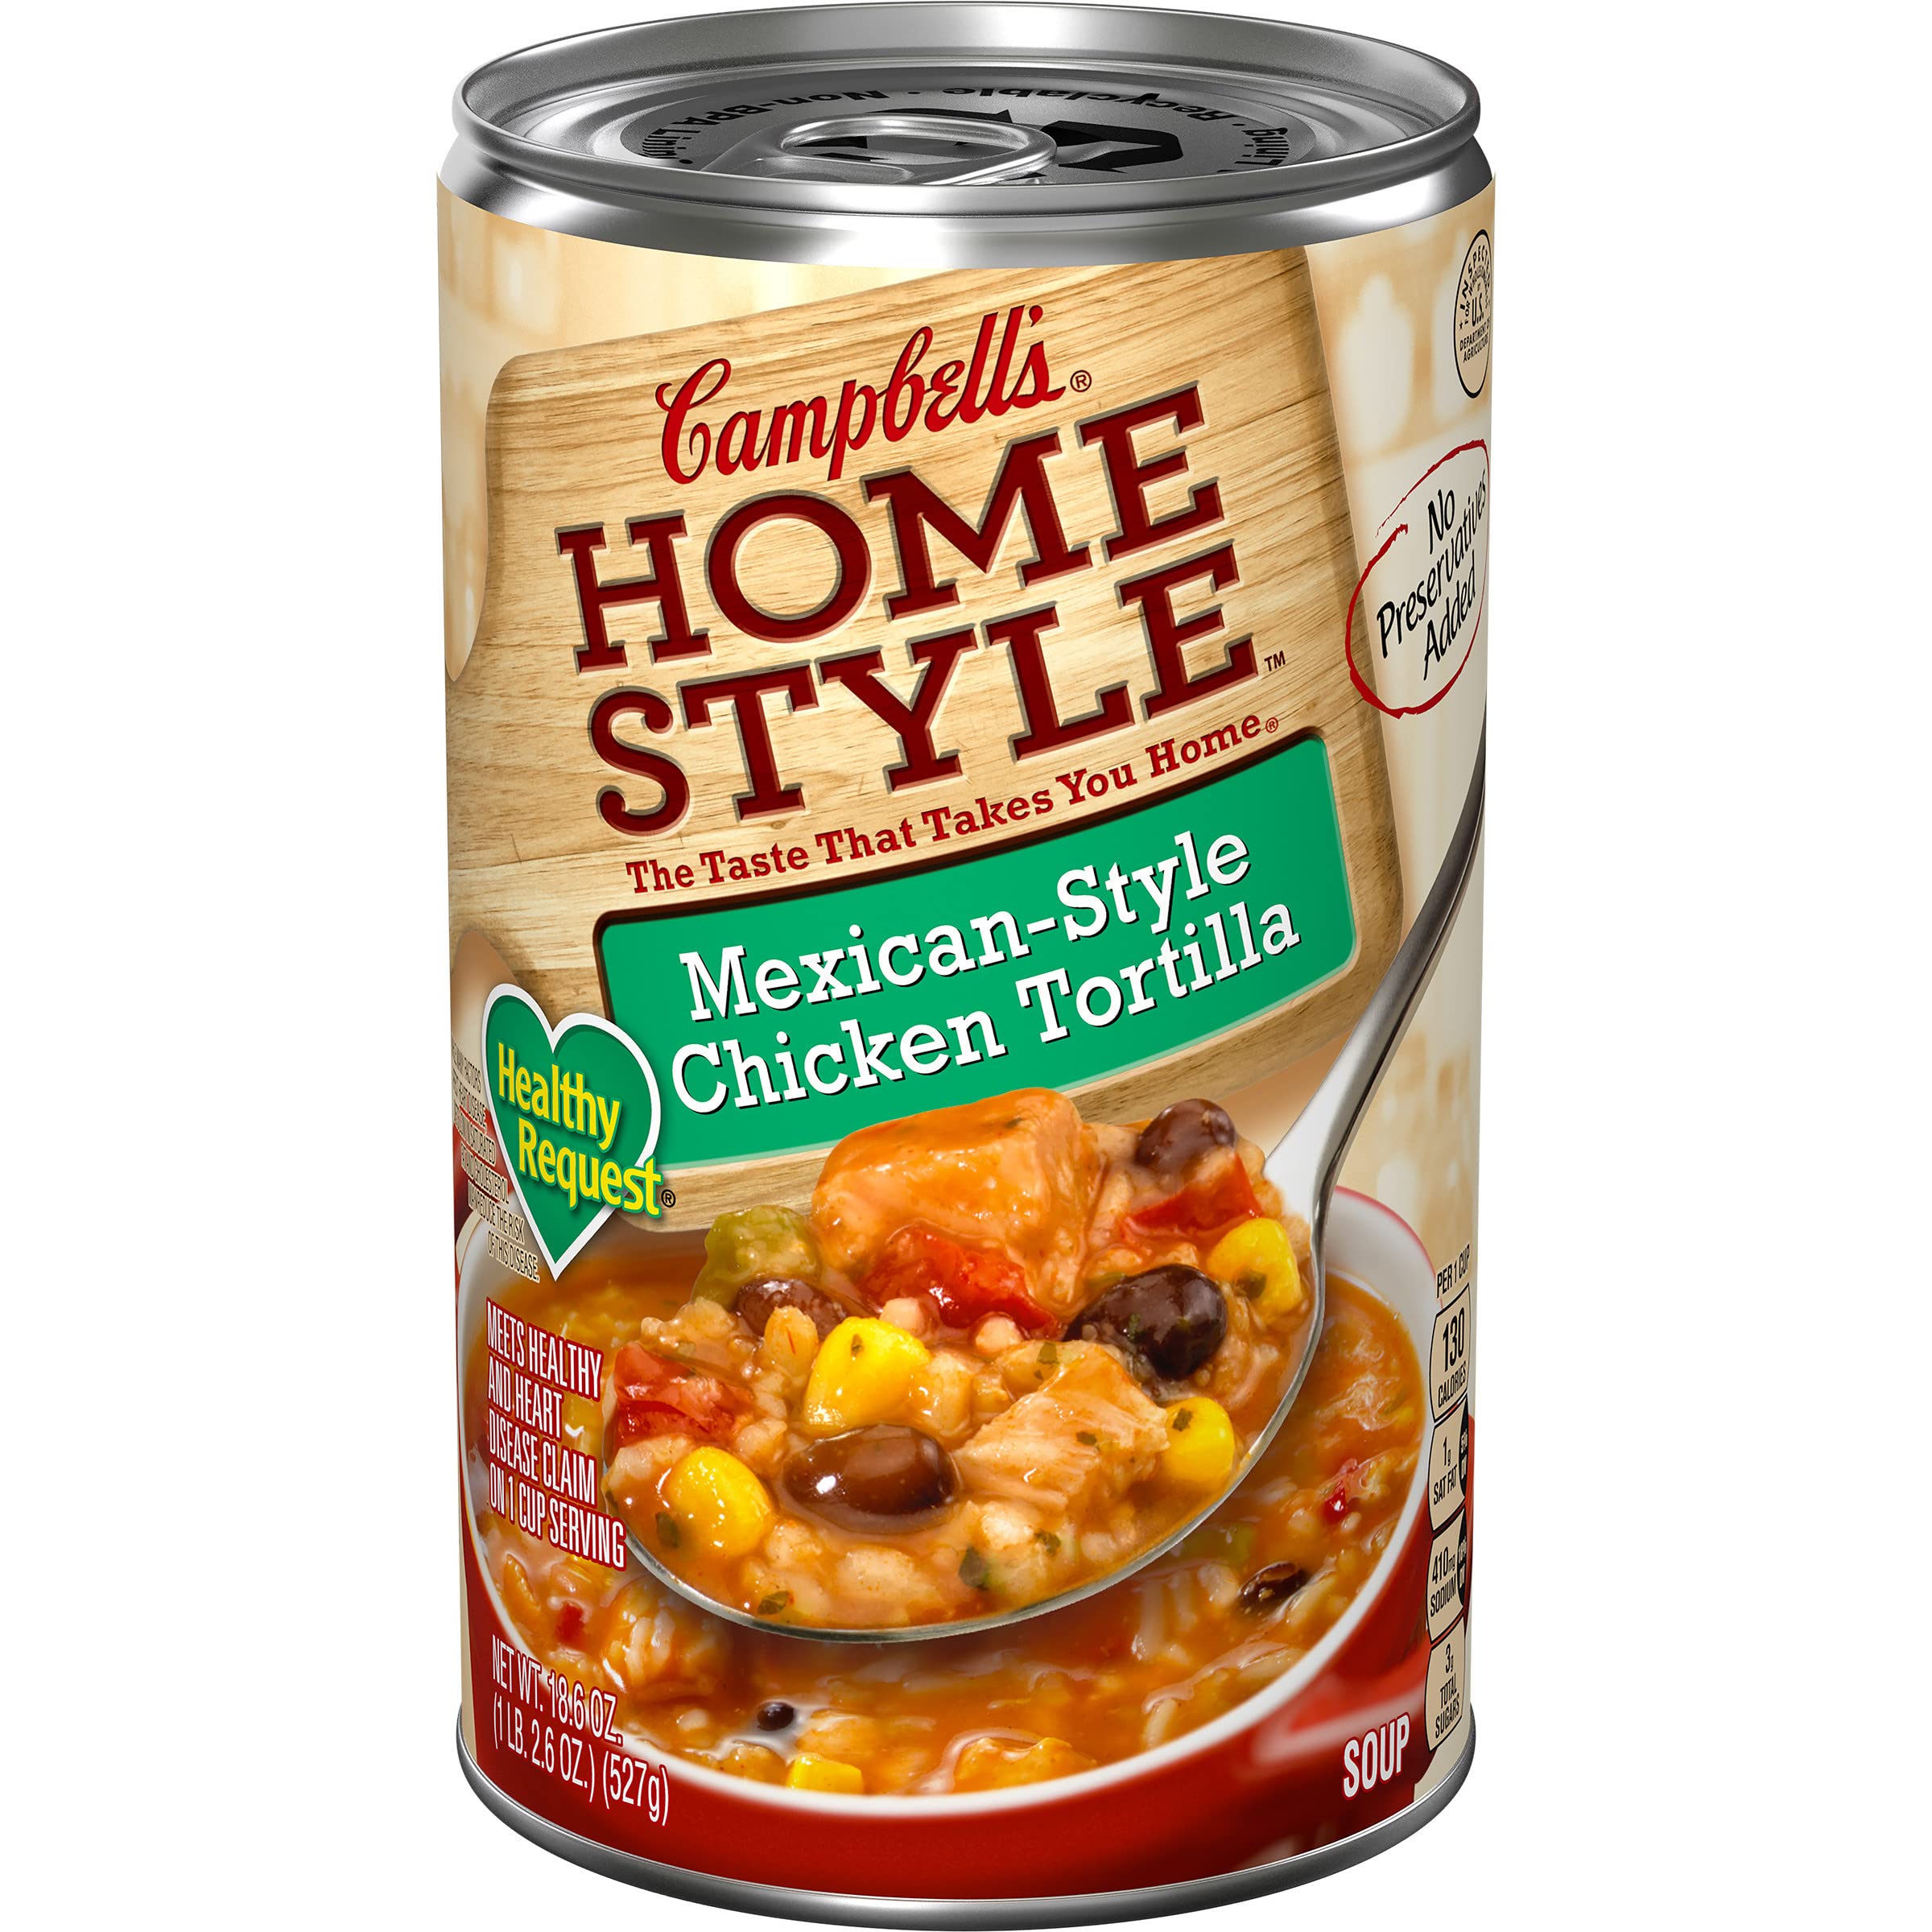 Campbell's Homestyle Healthy Request Mexican-Style Chicken Tortilla Soup, 18.6 Oz (Pack of 12)